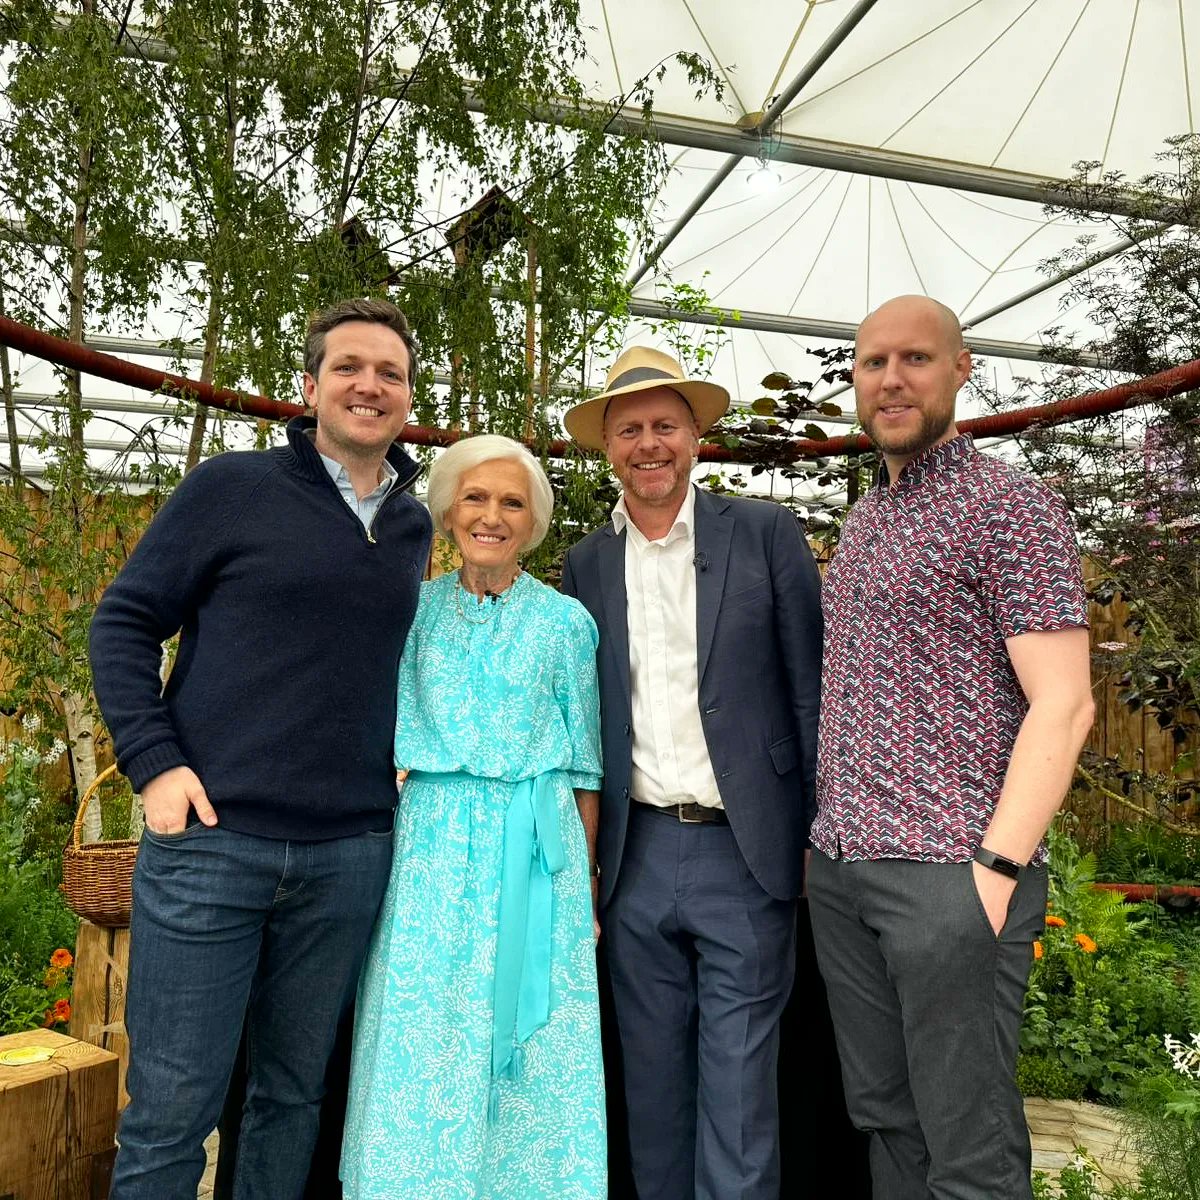 Day 3 of show week, and it's been another busy but brilliant day at the Chelsea Flower Show🌿

We've spoken to lots of lovely members of the public, and had some more special guests visit the garden!

#peopleschoiceaward #RHSChelsea #chelseaflowershow #gardening #inclusionmatters